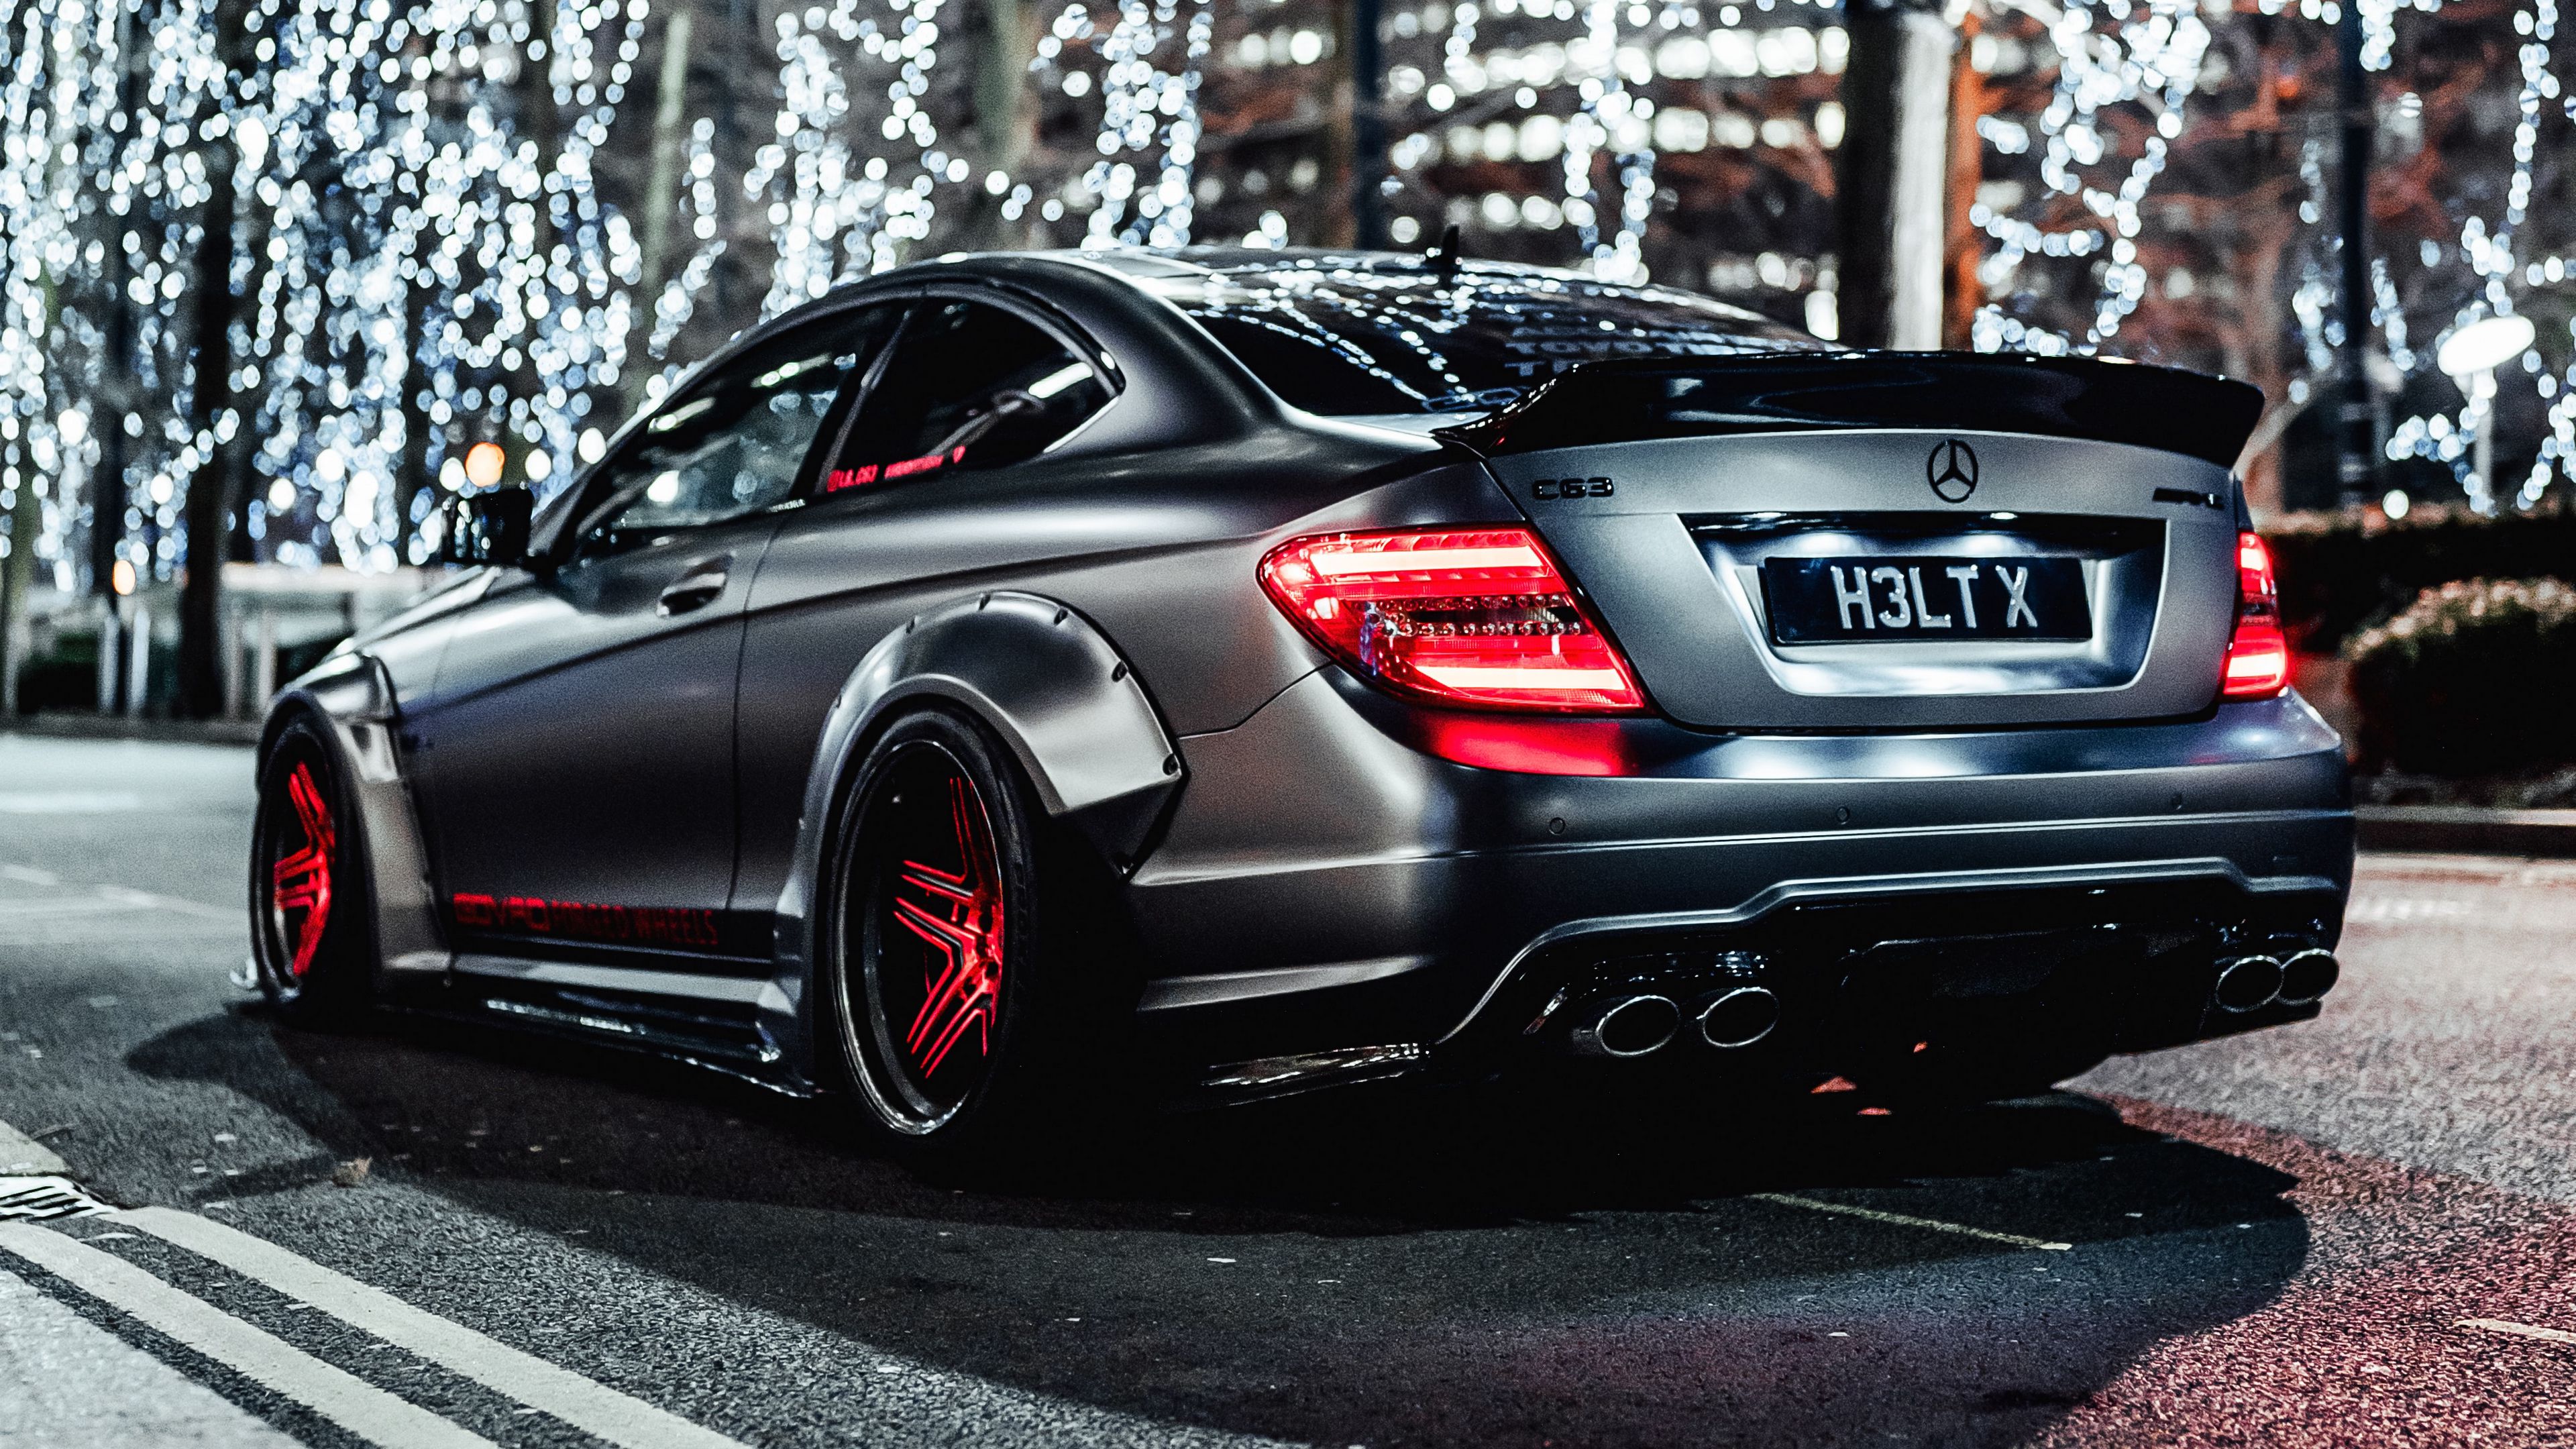 HD Wallpaper For Theme Mercedes Benz C63 Amg